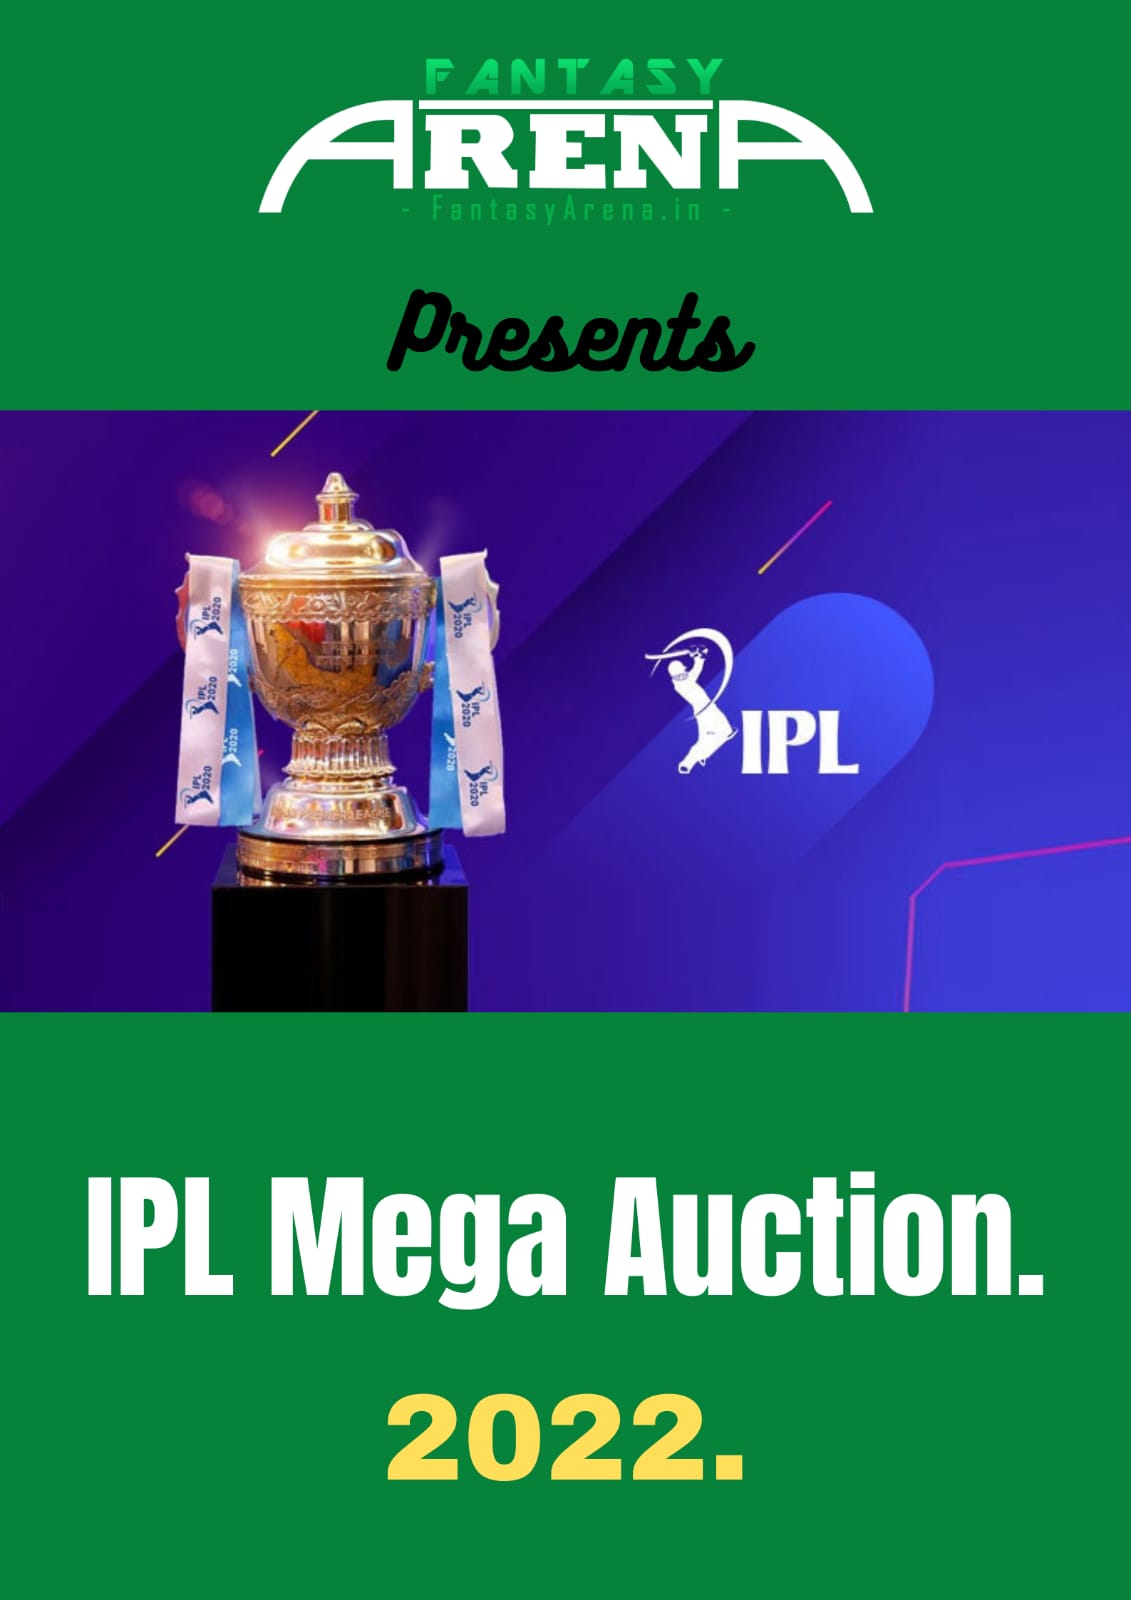 All you need to know about the IPL Auctions.